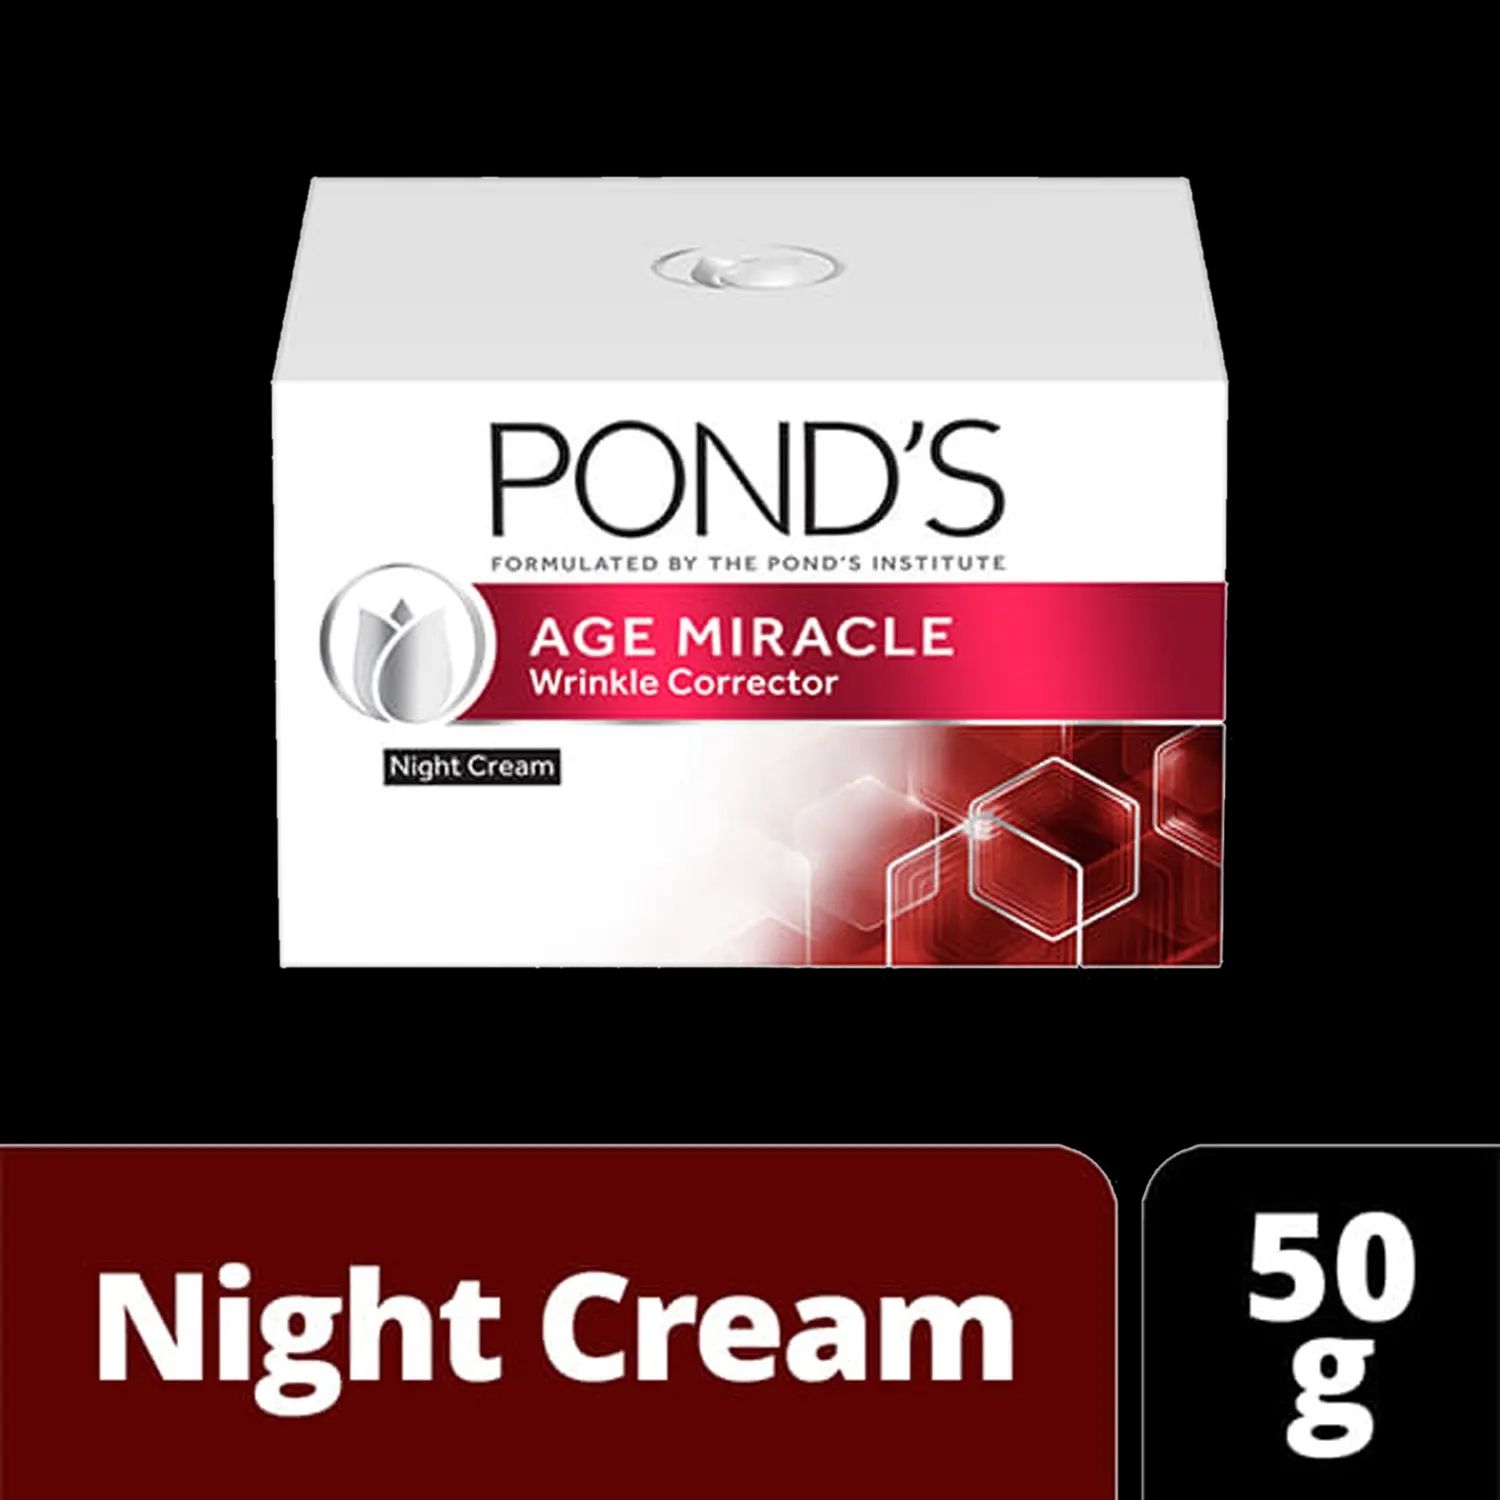 Pond's | Pond's Age Miracle Wrinkle Corrector Night Cream (50g)